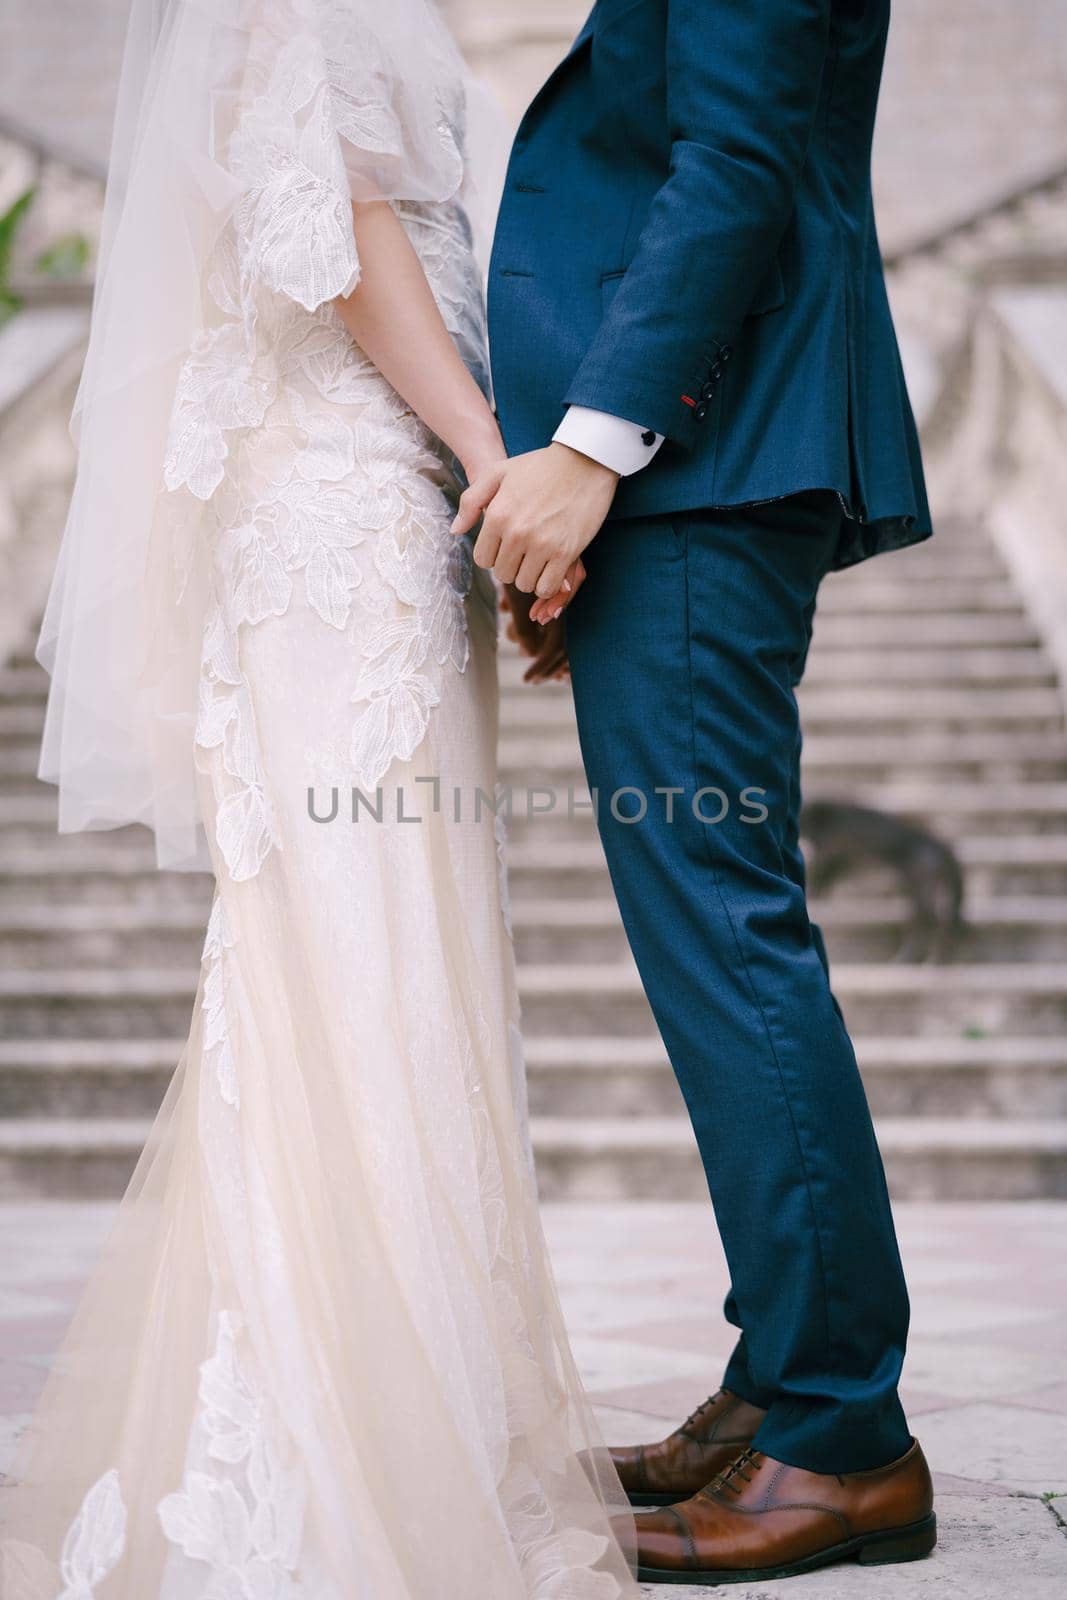 Bride and groom stand holding hands on the stone steps. Close-up. High quality photo